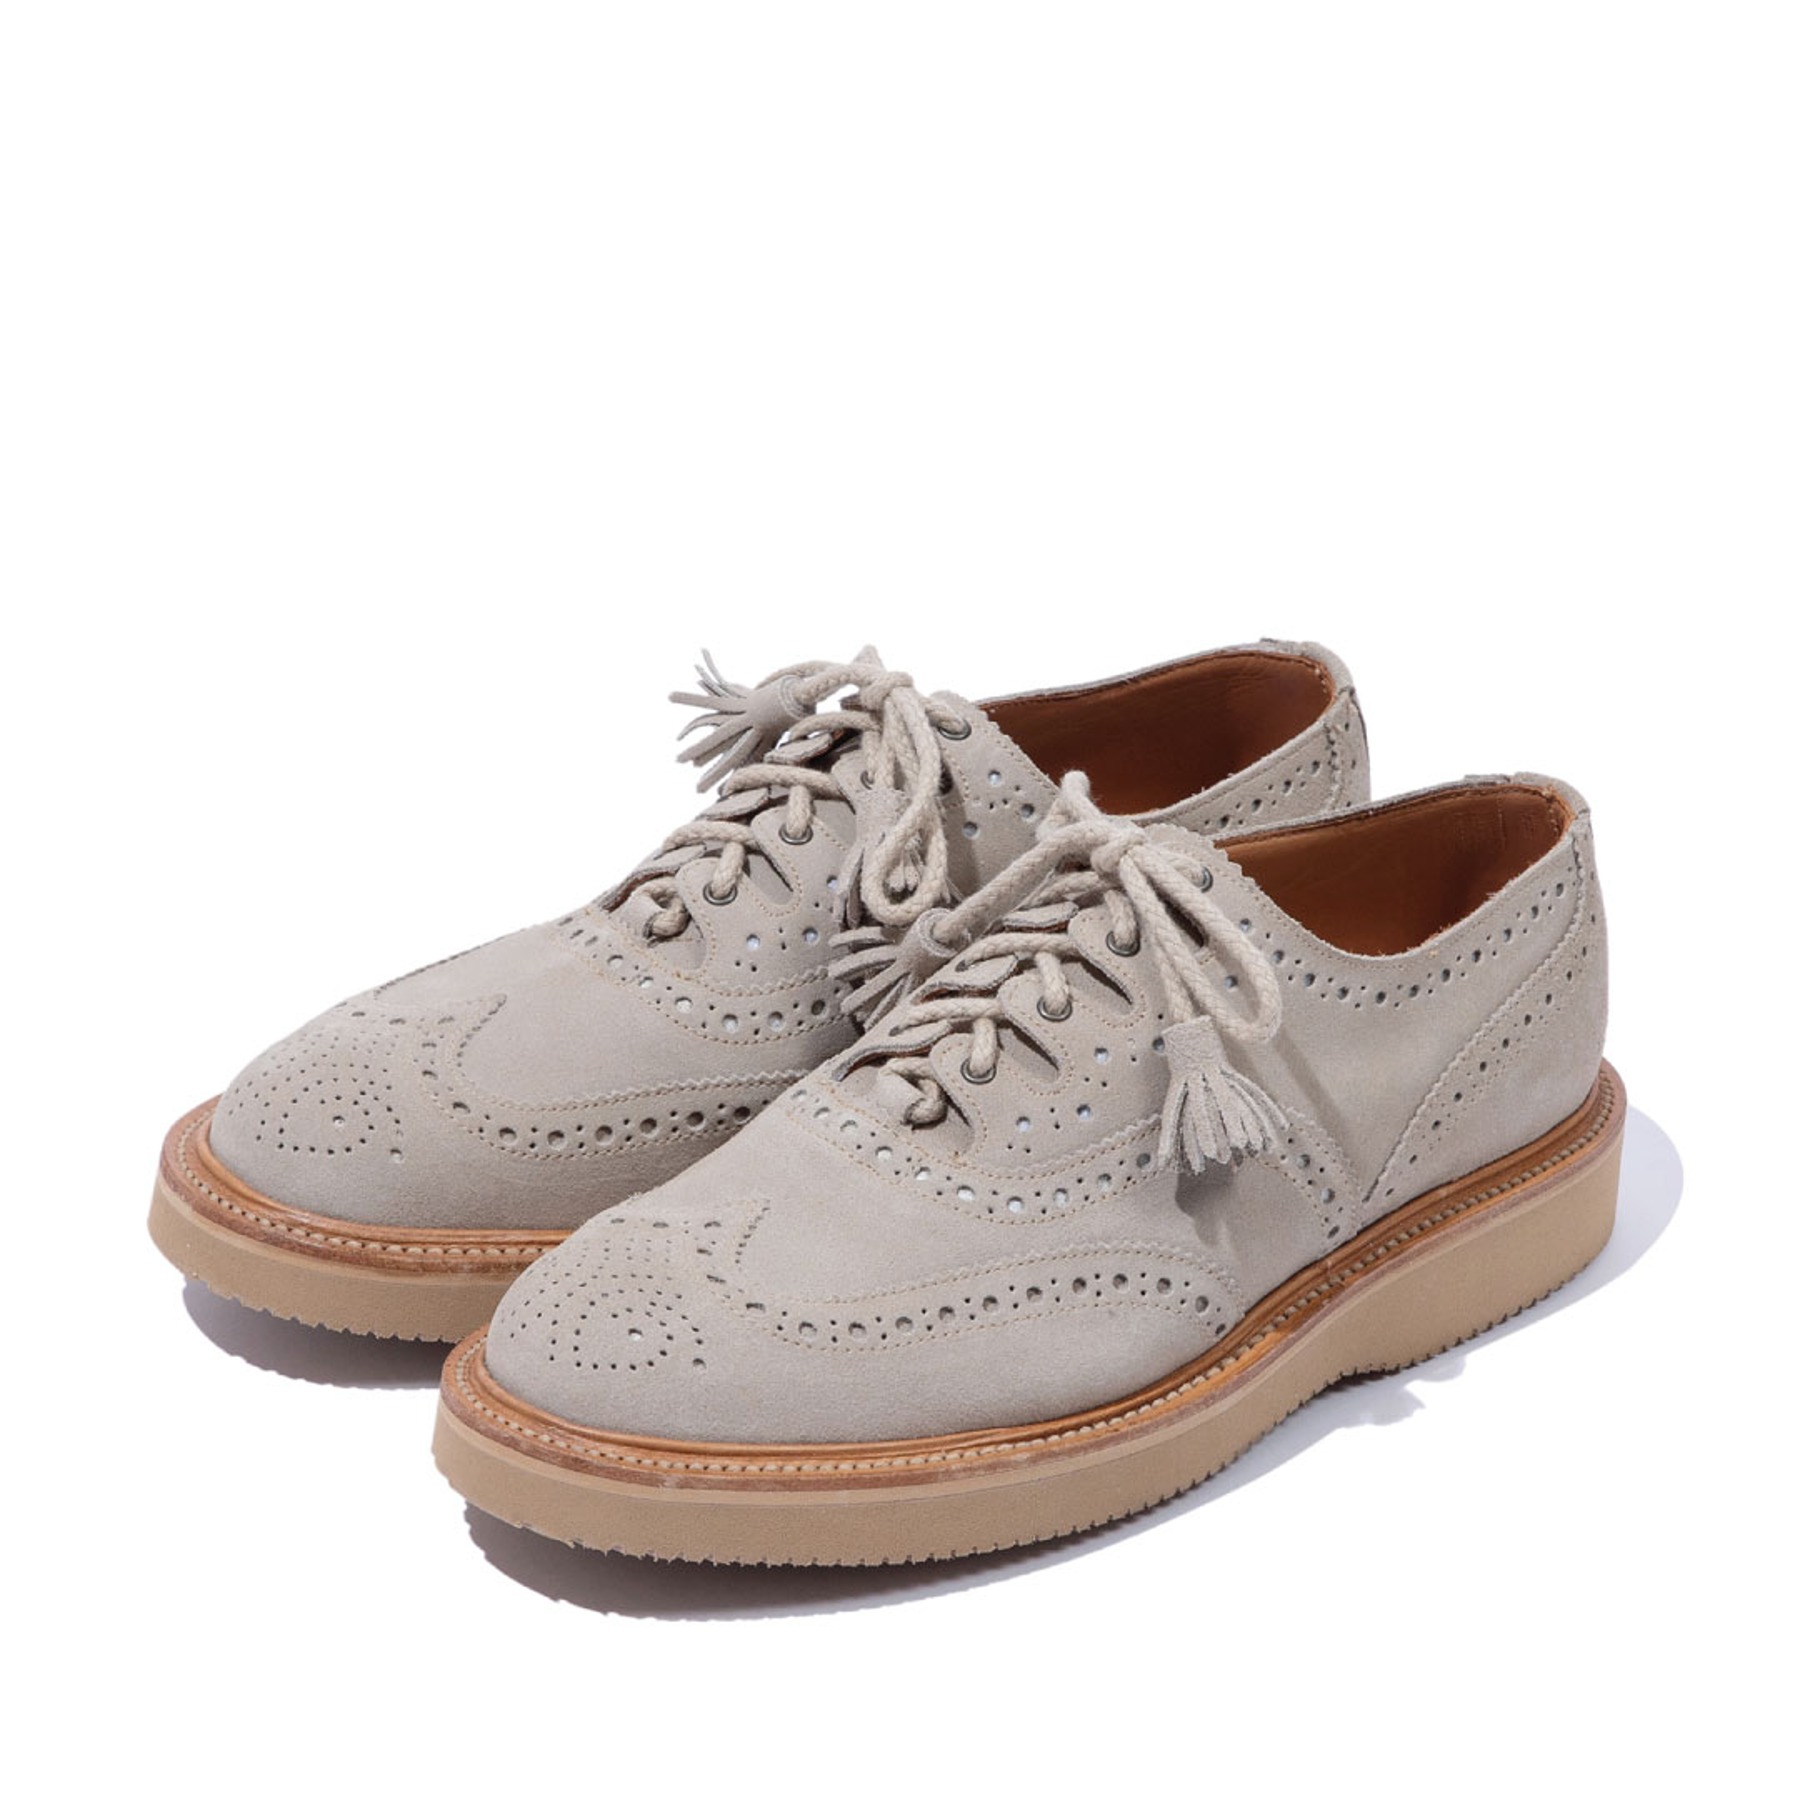 MILITARY GHILLIE SHOES - SANDSTONE SUEDE with VIBRAM